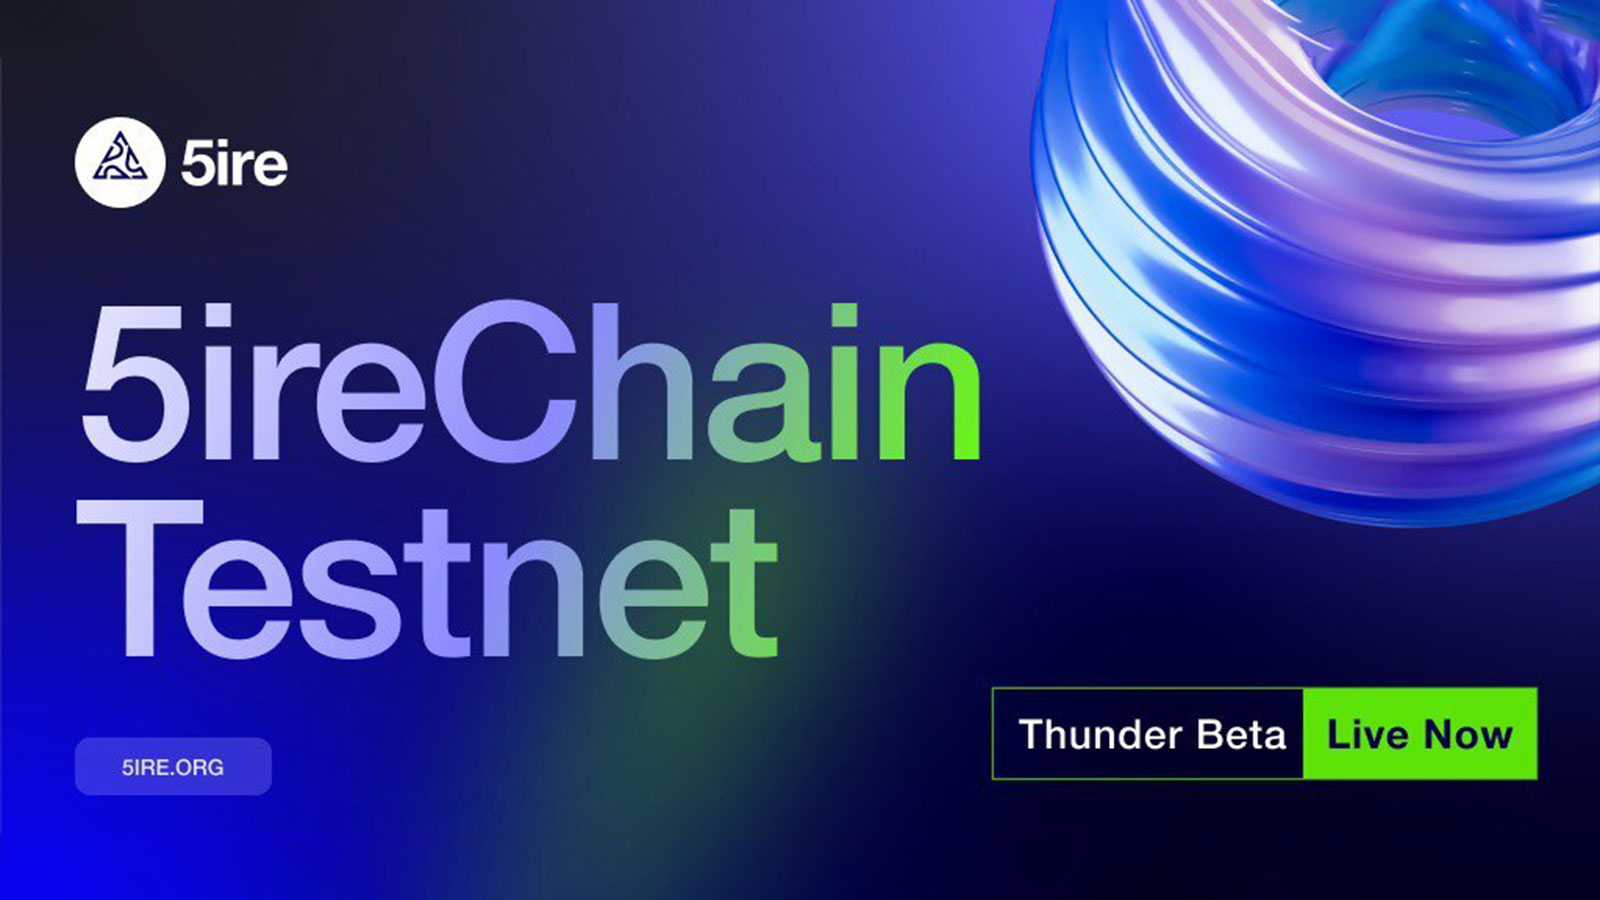 5ire Launches Testnet: Thunder (Beta) for its Groundbreaking Blockchain Project